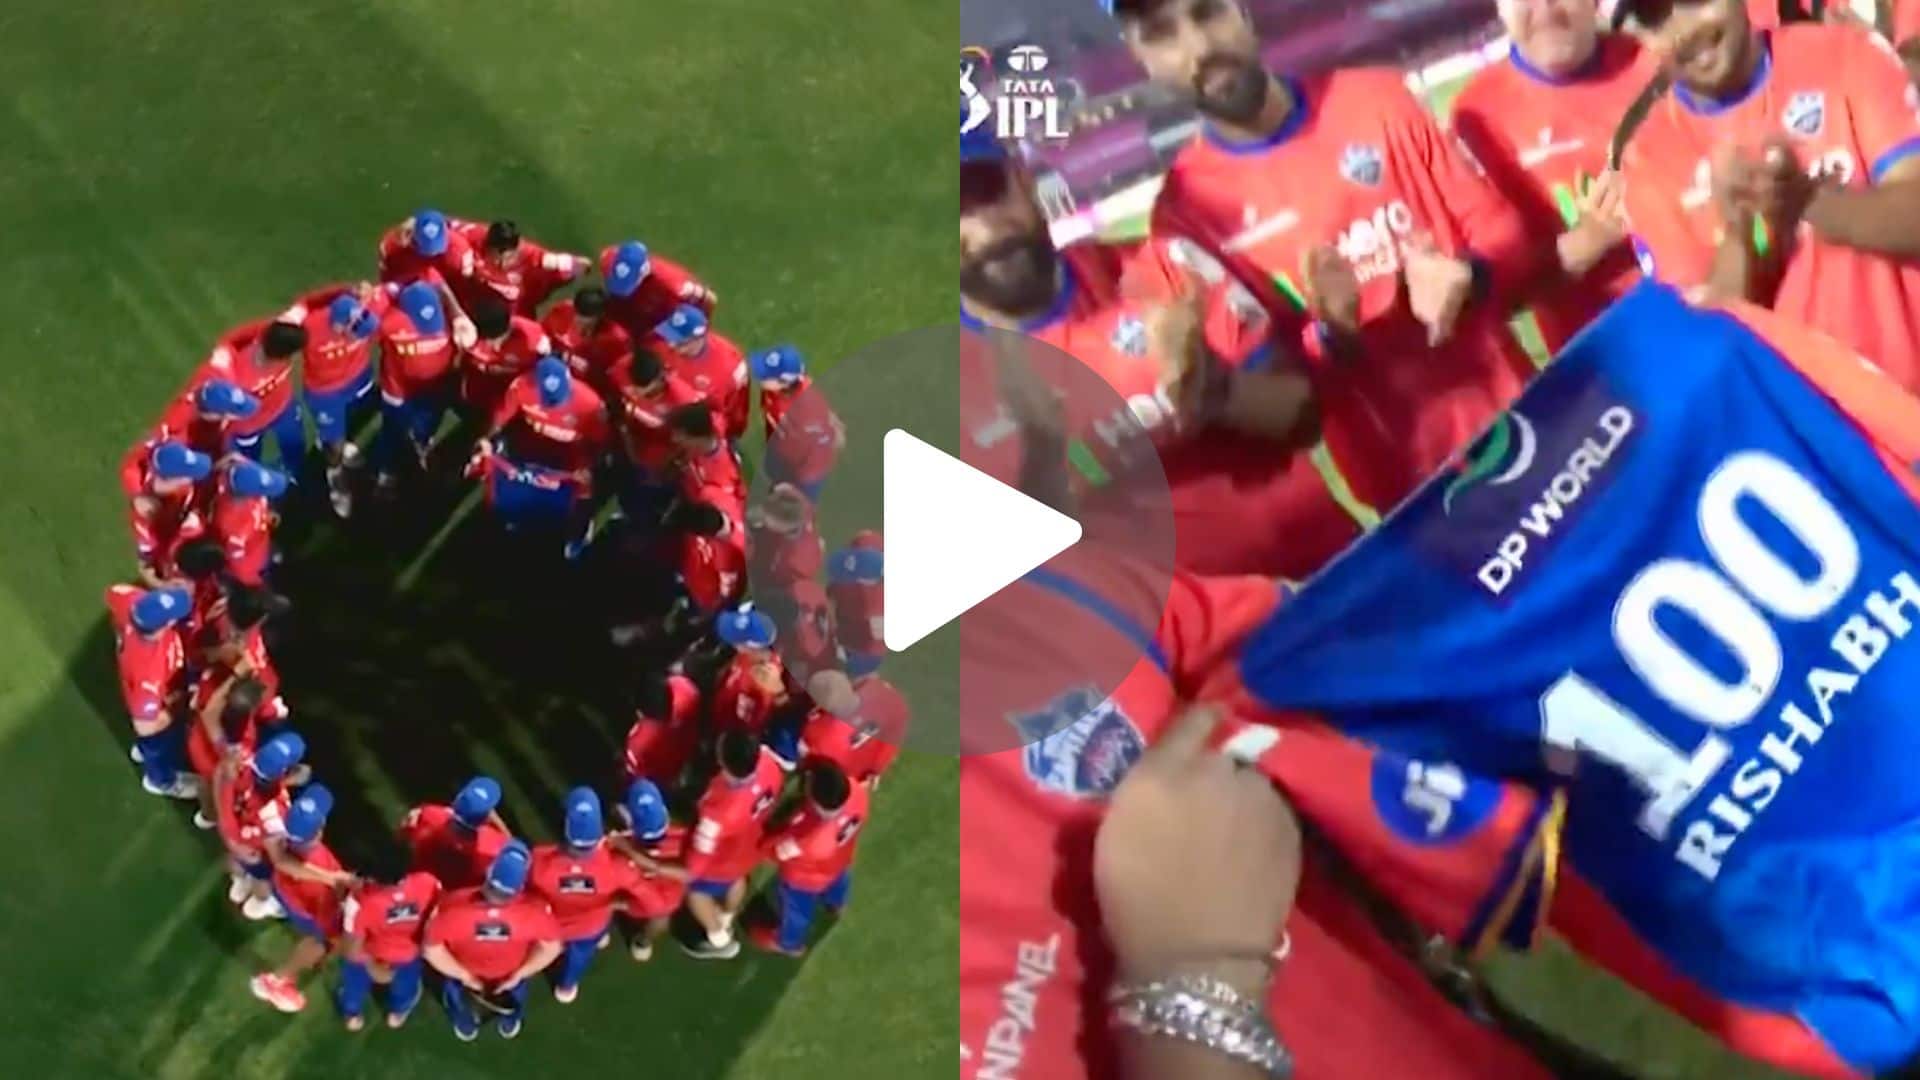 [Watch] Rishabh Pant Honoured With 'Special Jersey' For 100th IPL Appearance